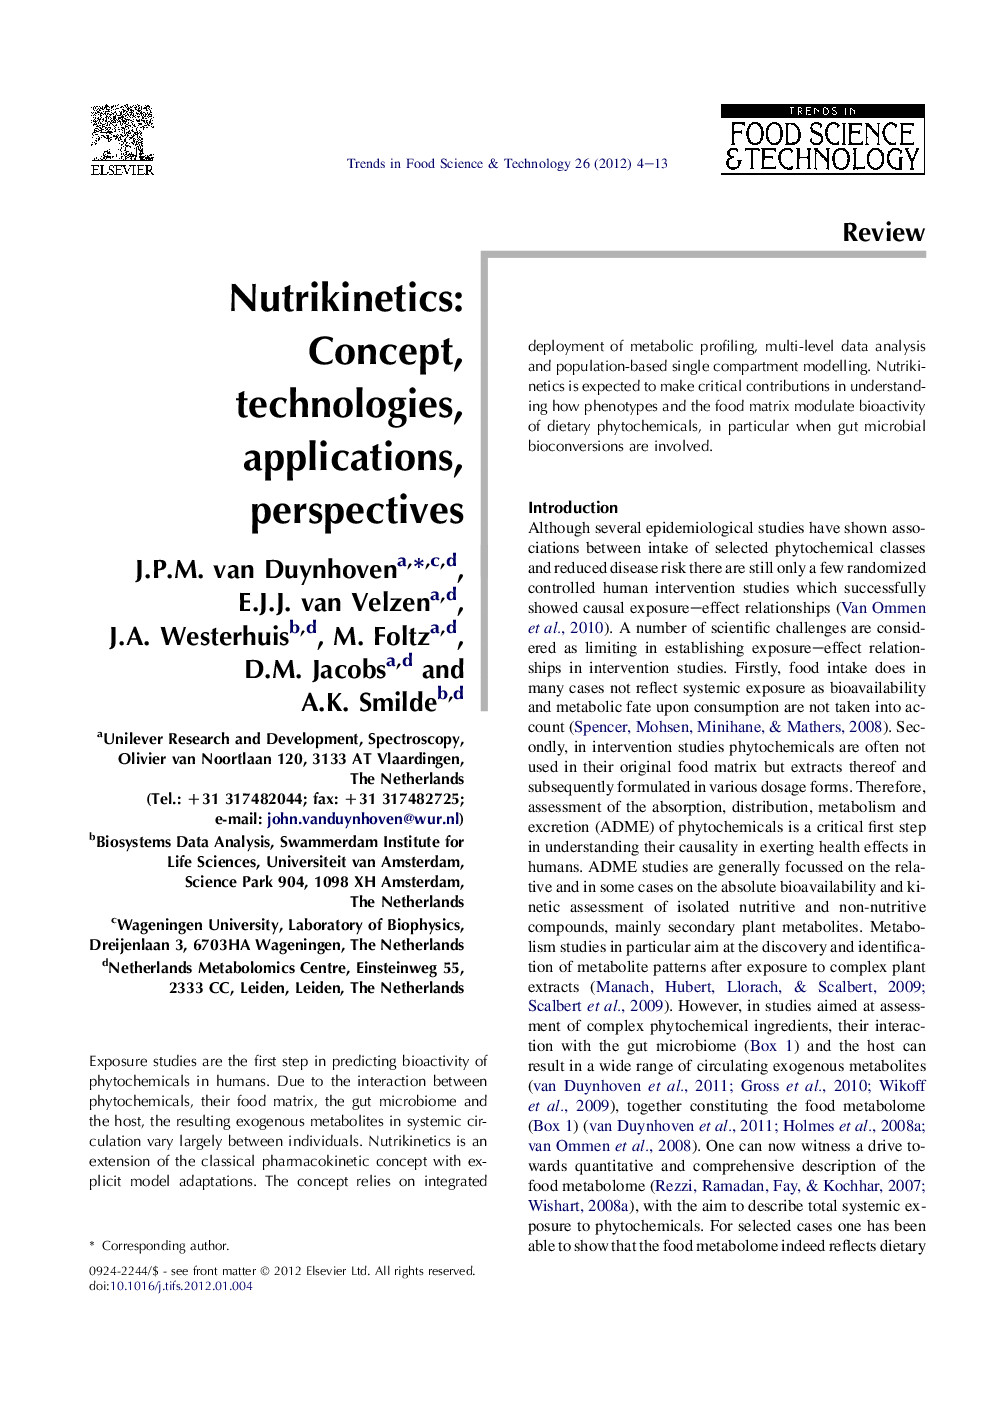 Nutrikinetics: Concept, technologies, applications, perspectives